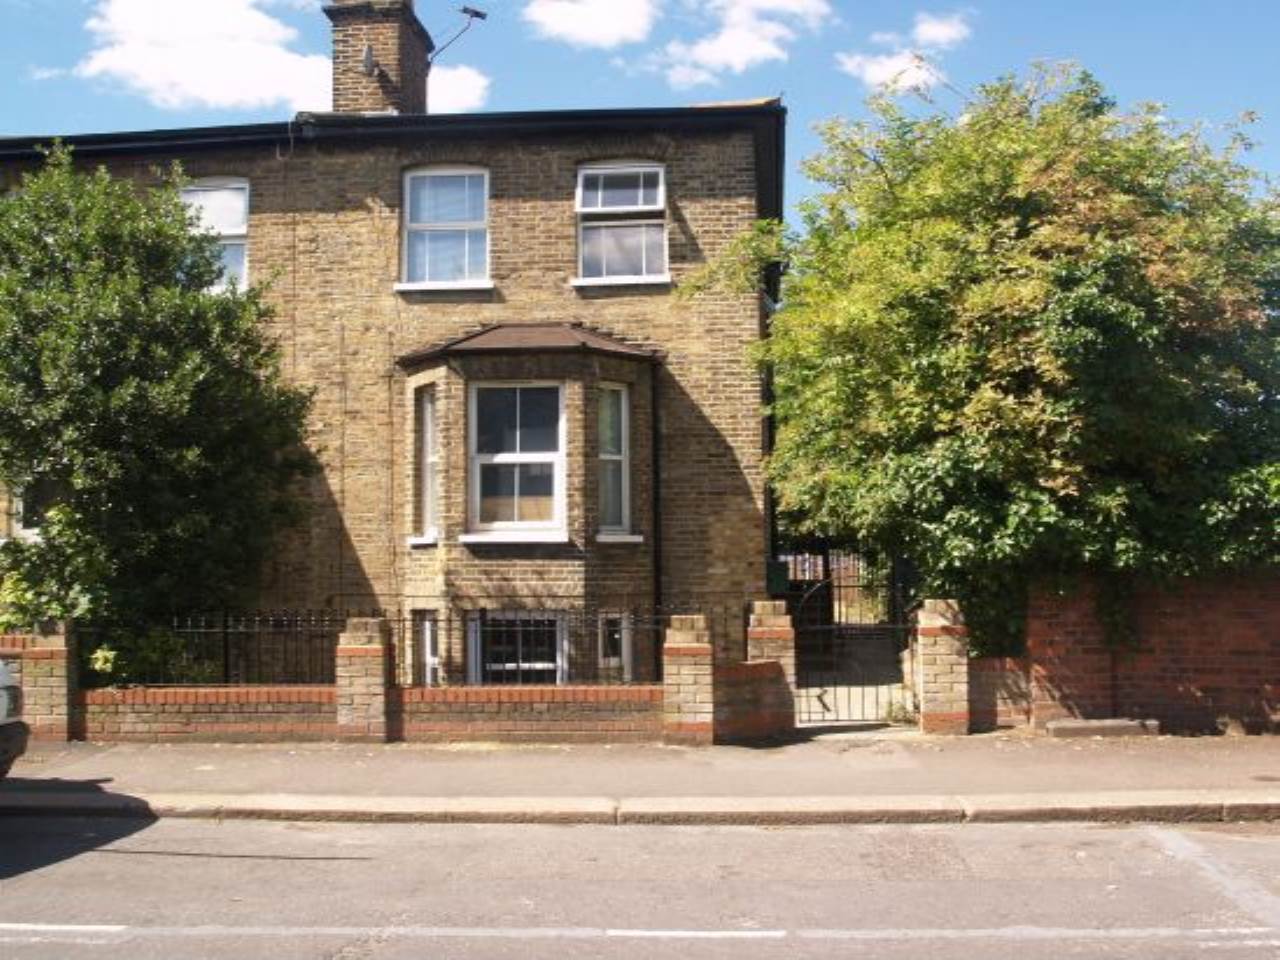 1 bed studio flat to rent in East Avenue, Walthamstow, E17 